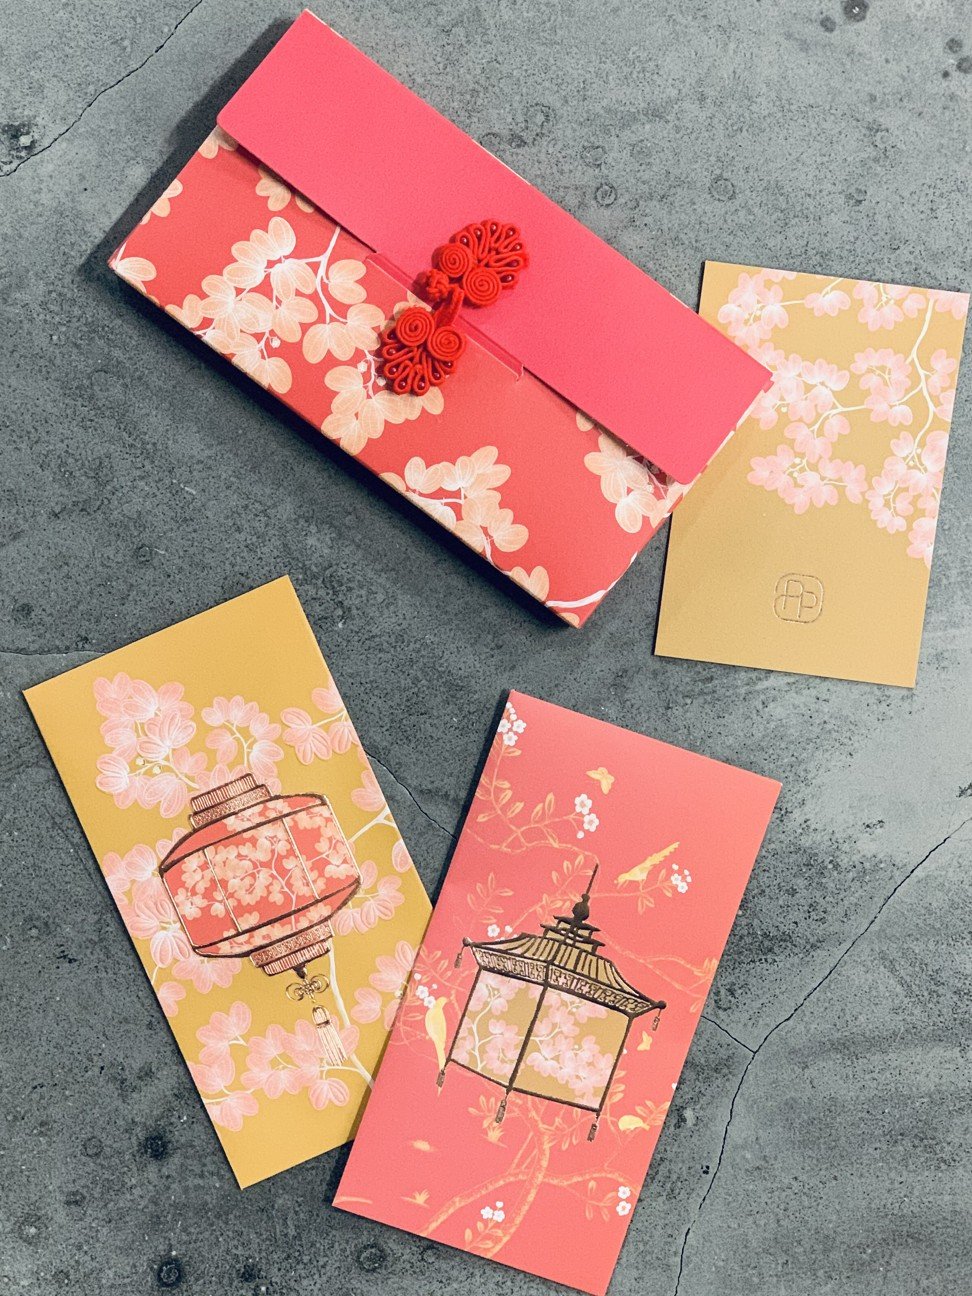 Pacific Place's red packets for 2020